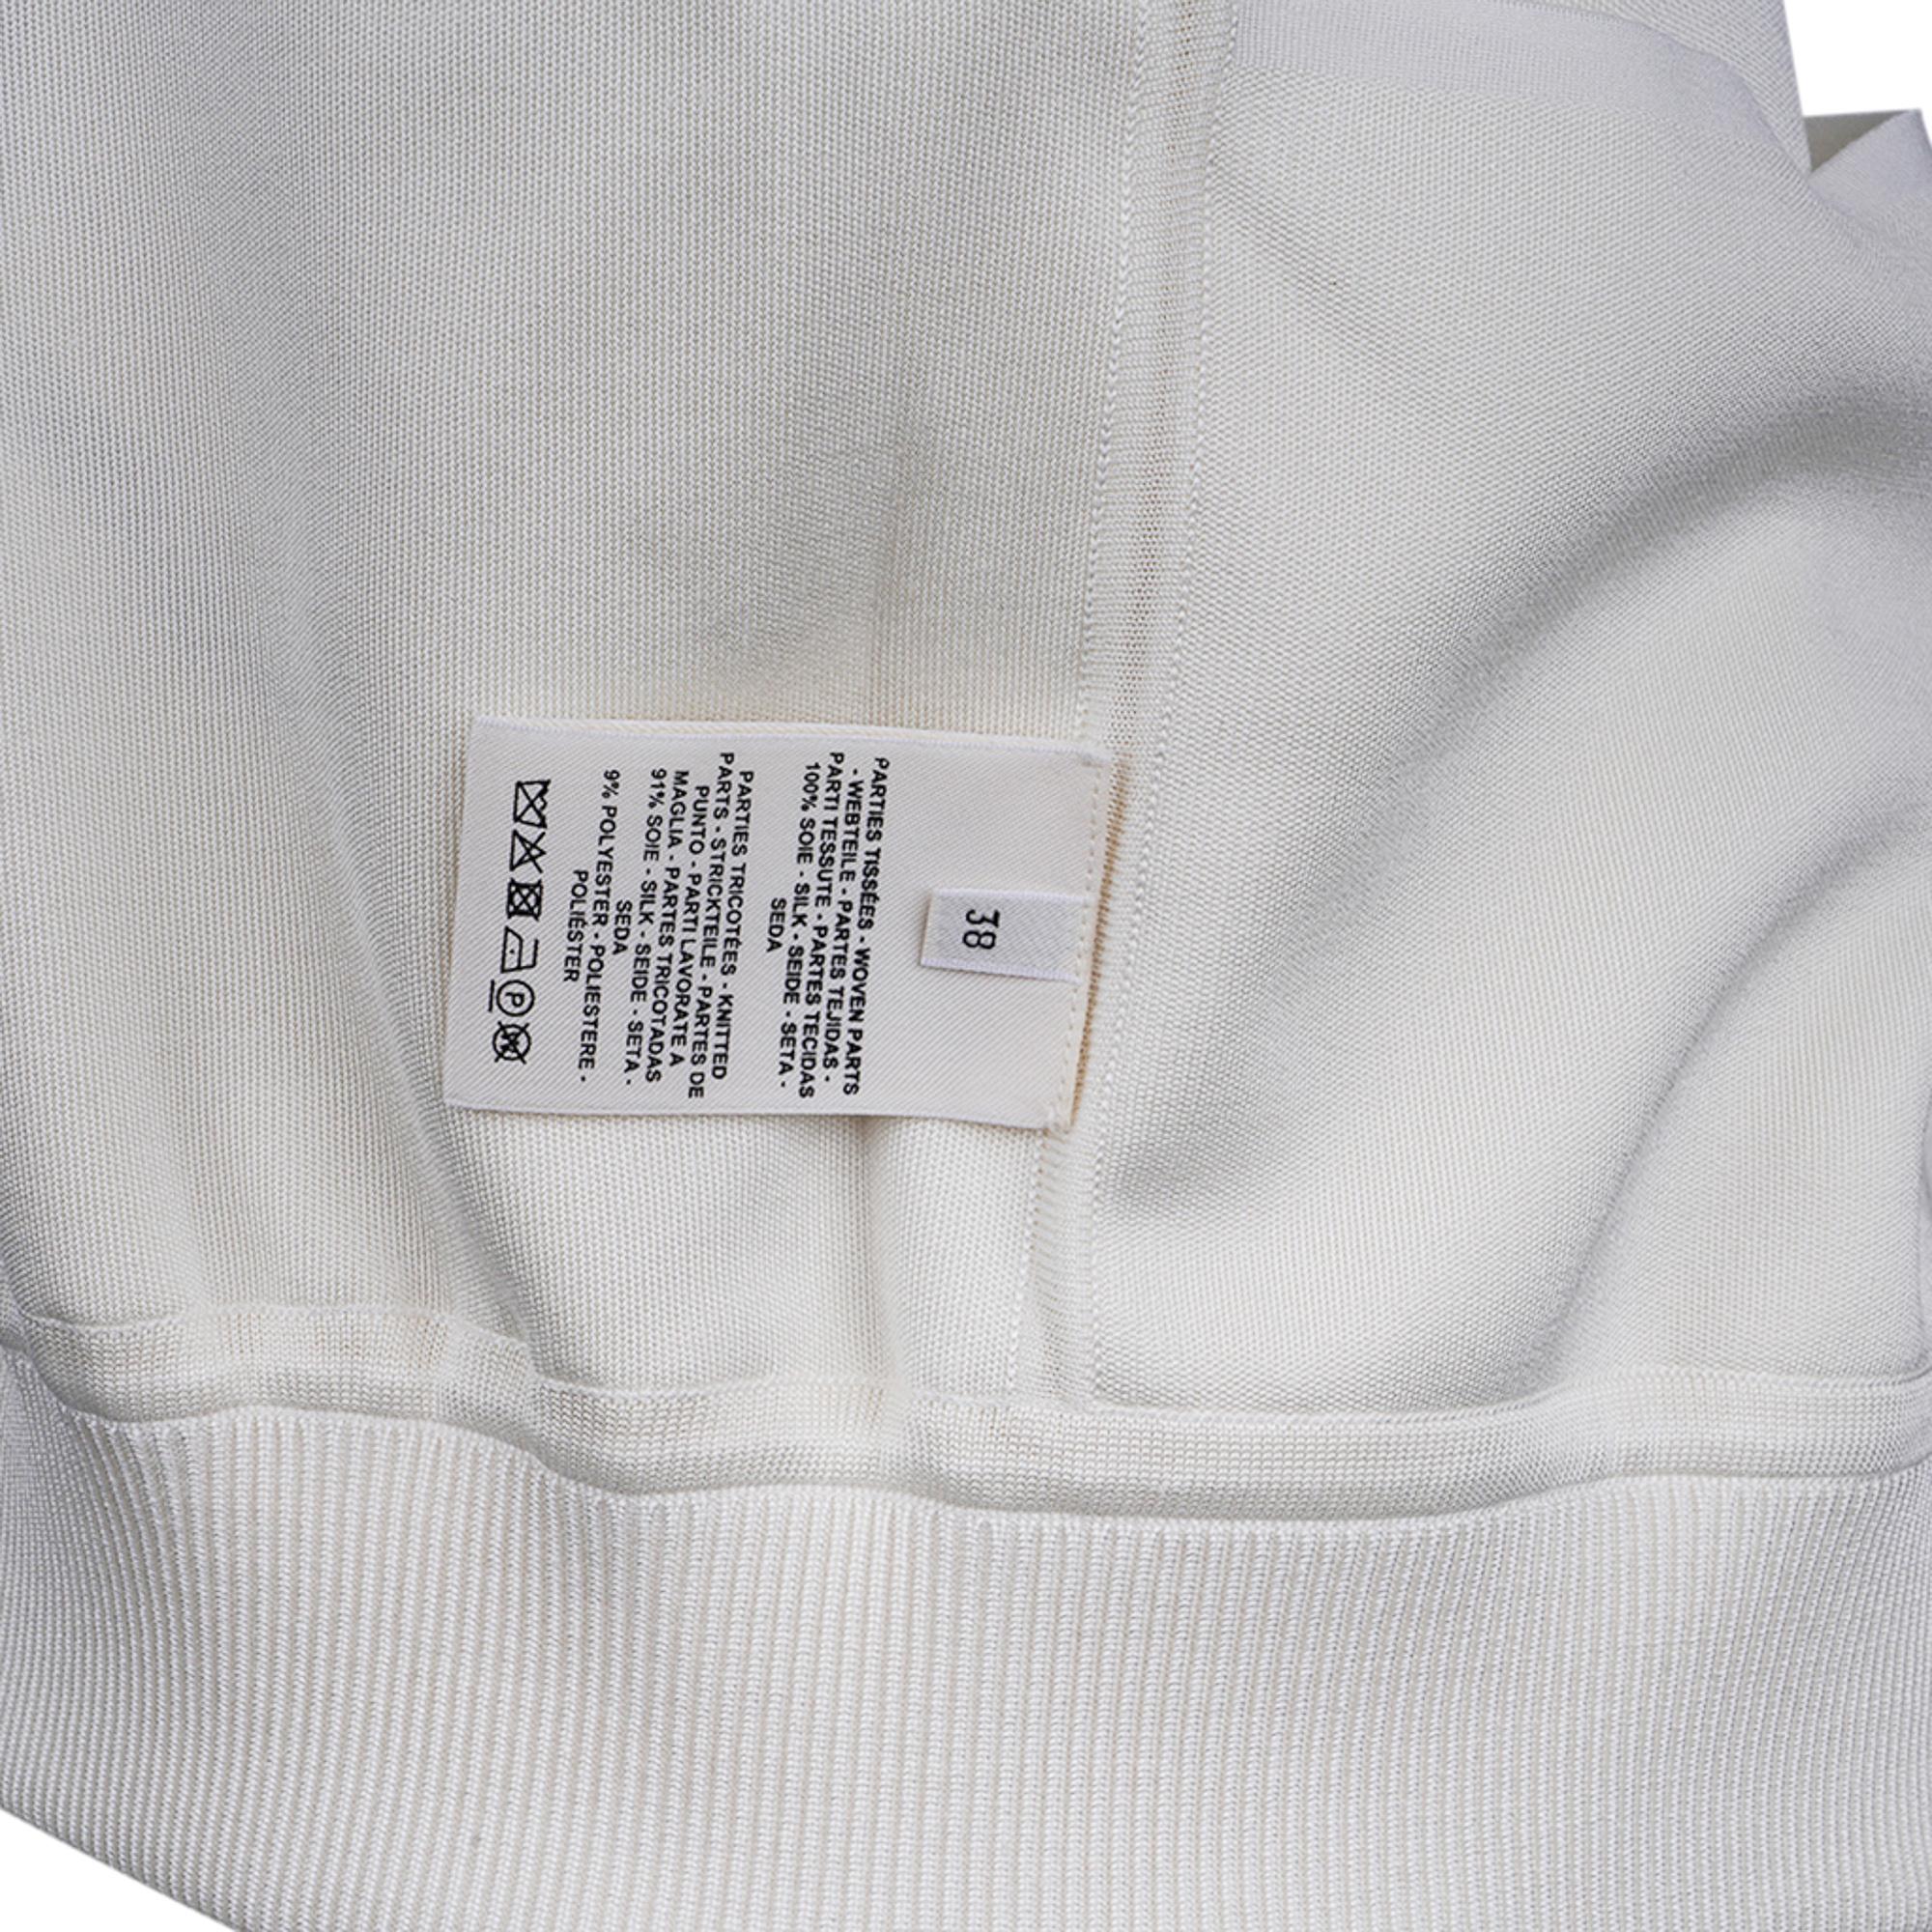 Hermes Cardigan Zip Clic Clac Winter White Jacket 38 / 6 For Sale 9